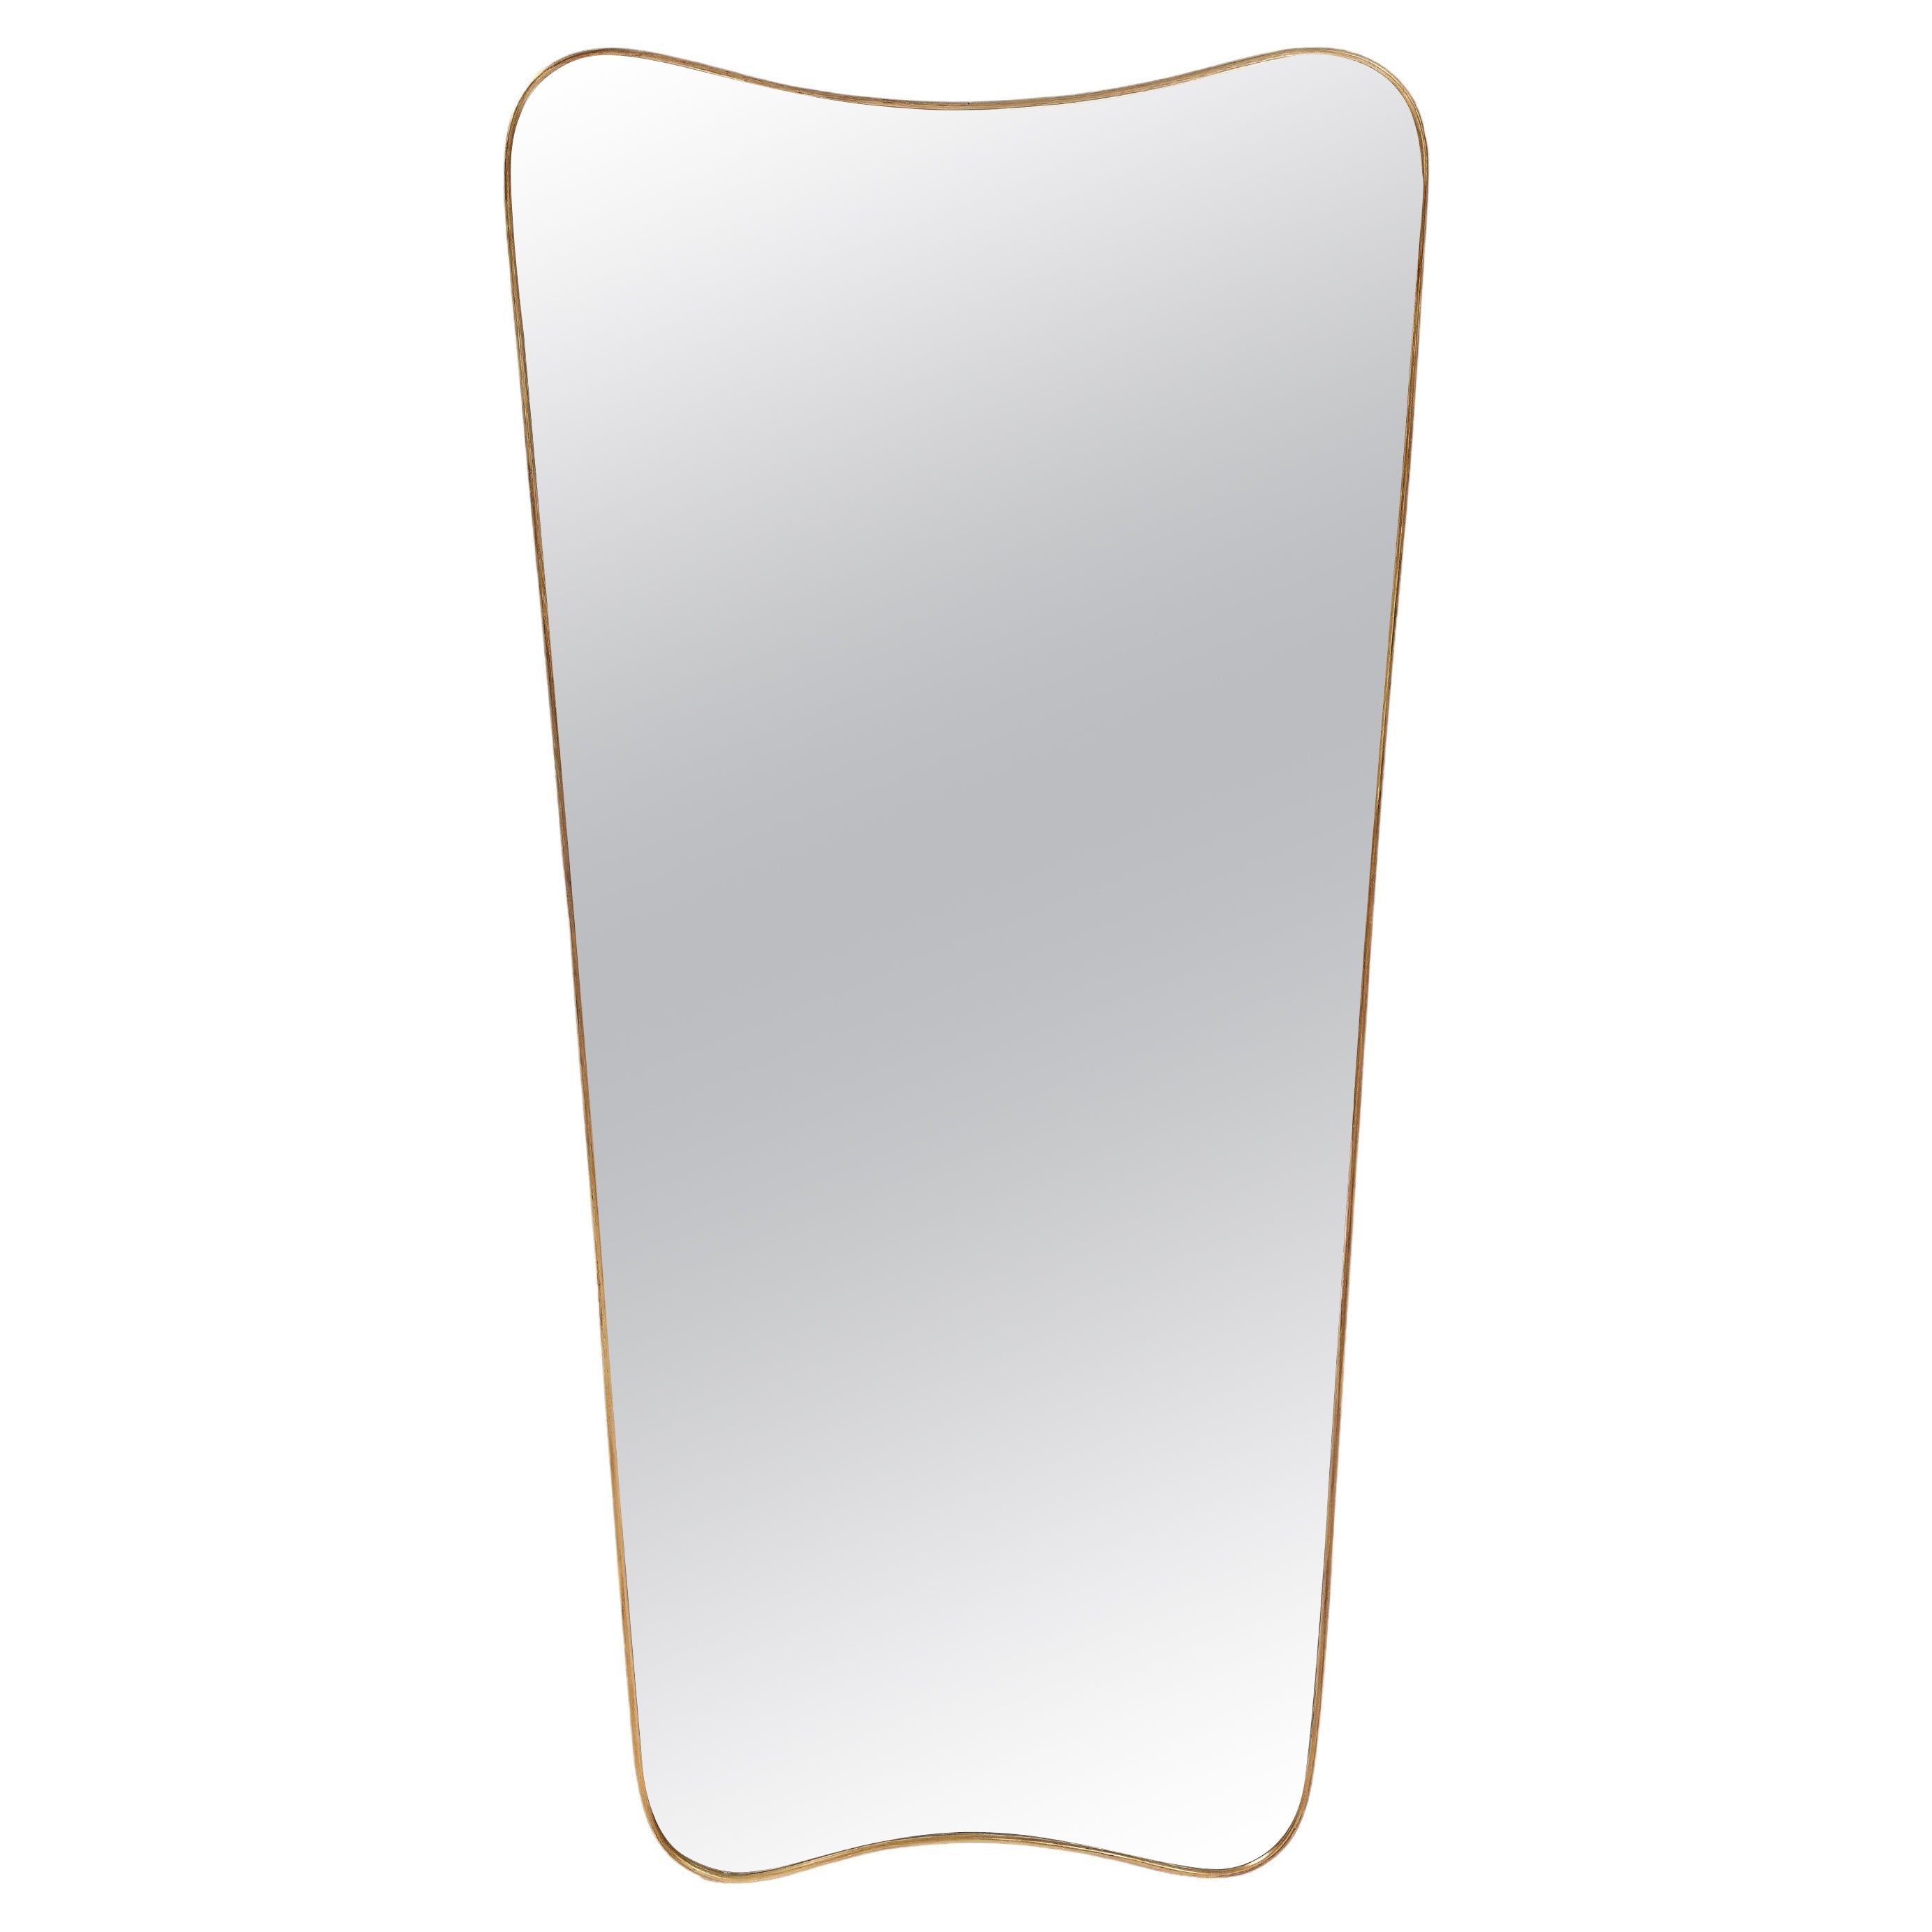 1950s Italian Modernist Grand Scale Shaped Brass Mirror For Sale